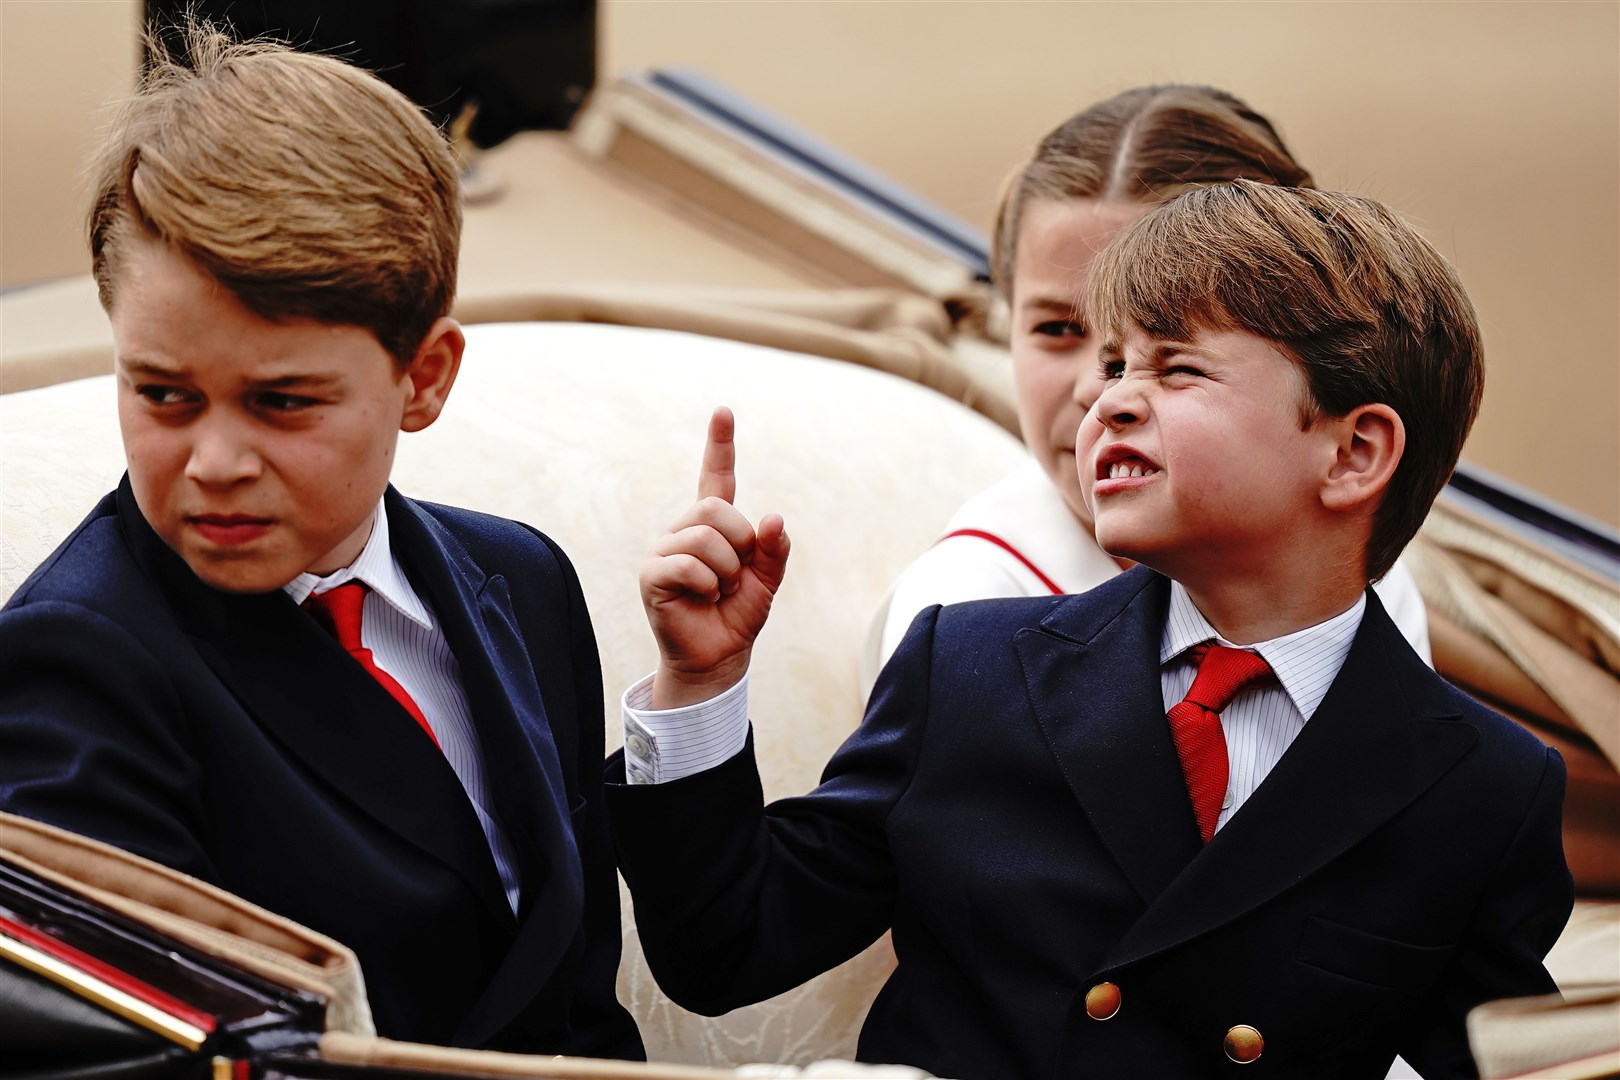 From left, Prince George, Prince Louis and Princess Charlotte ride in a carriage (Aaron Chown/PA)